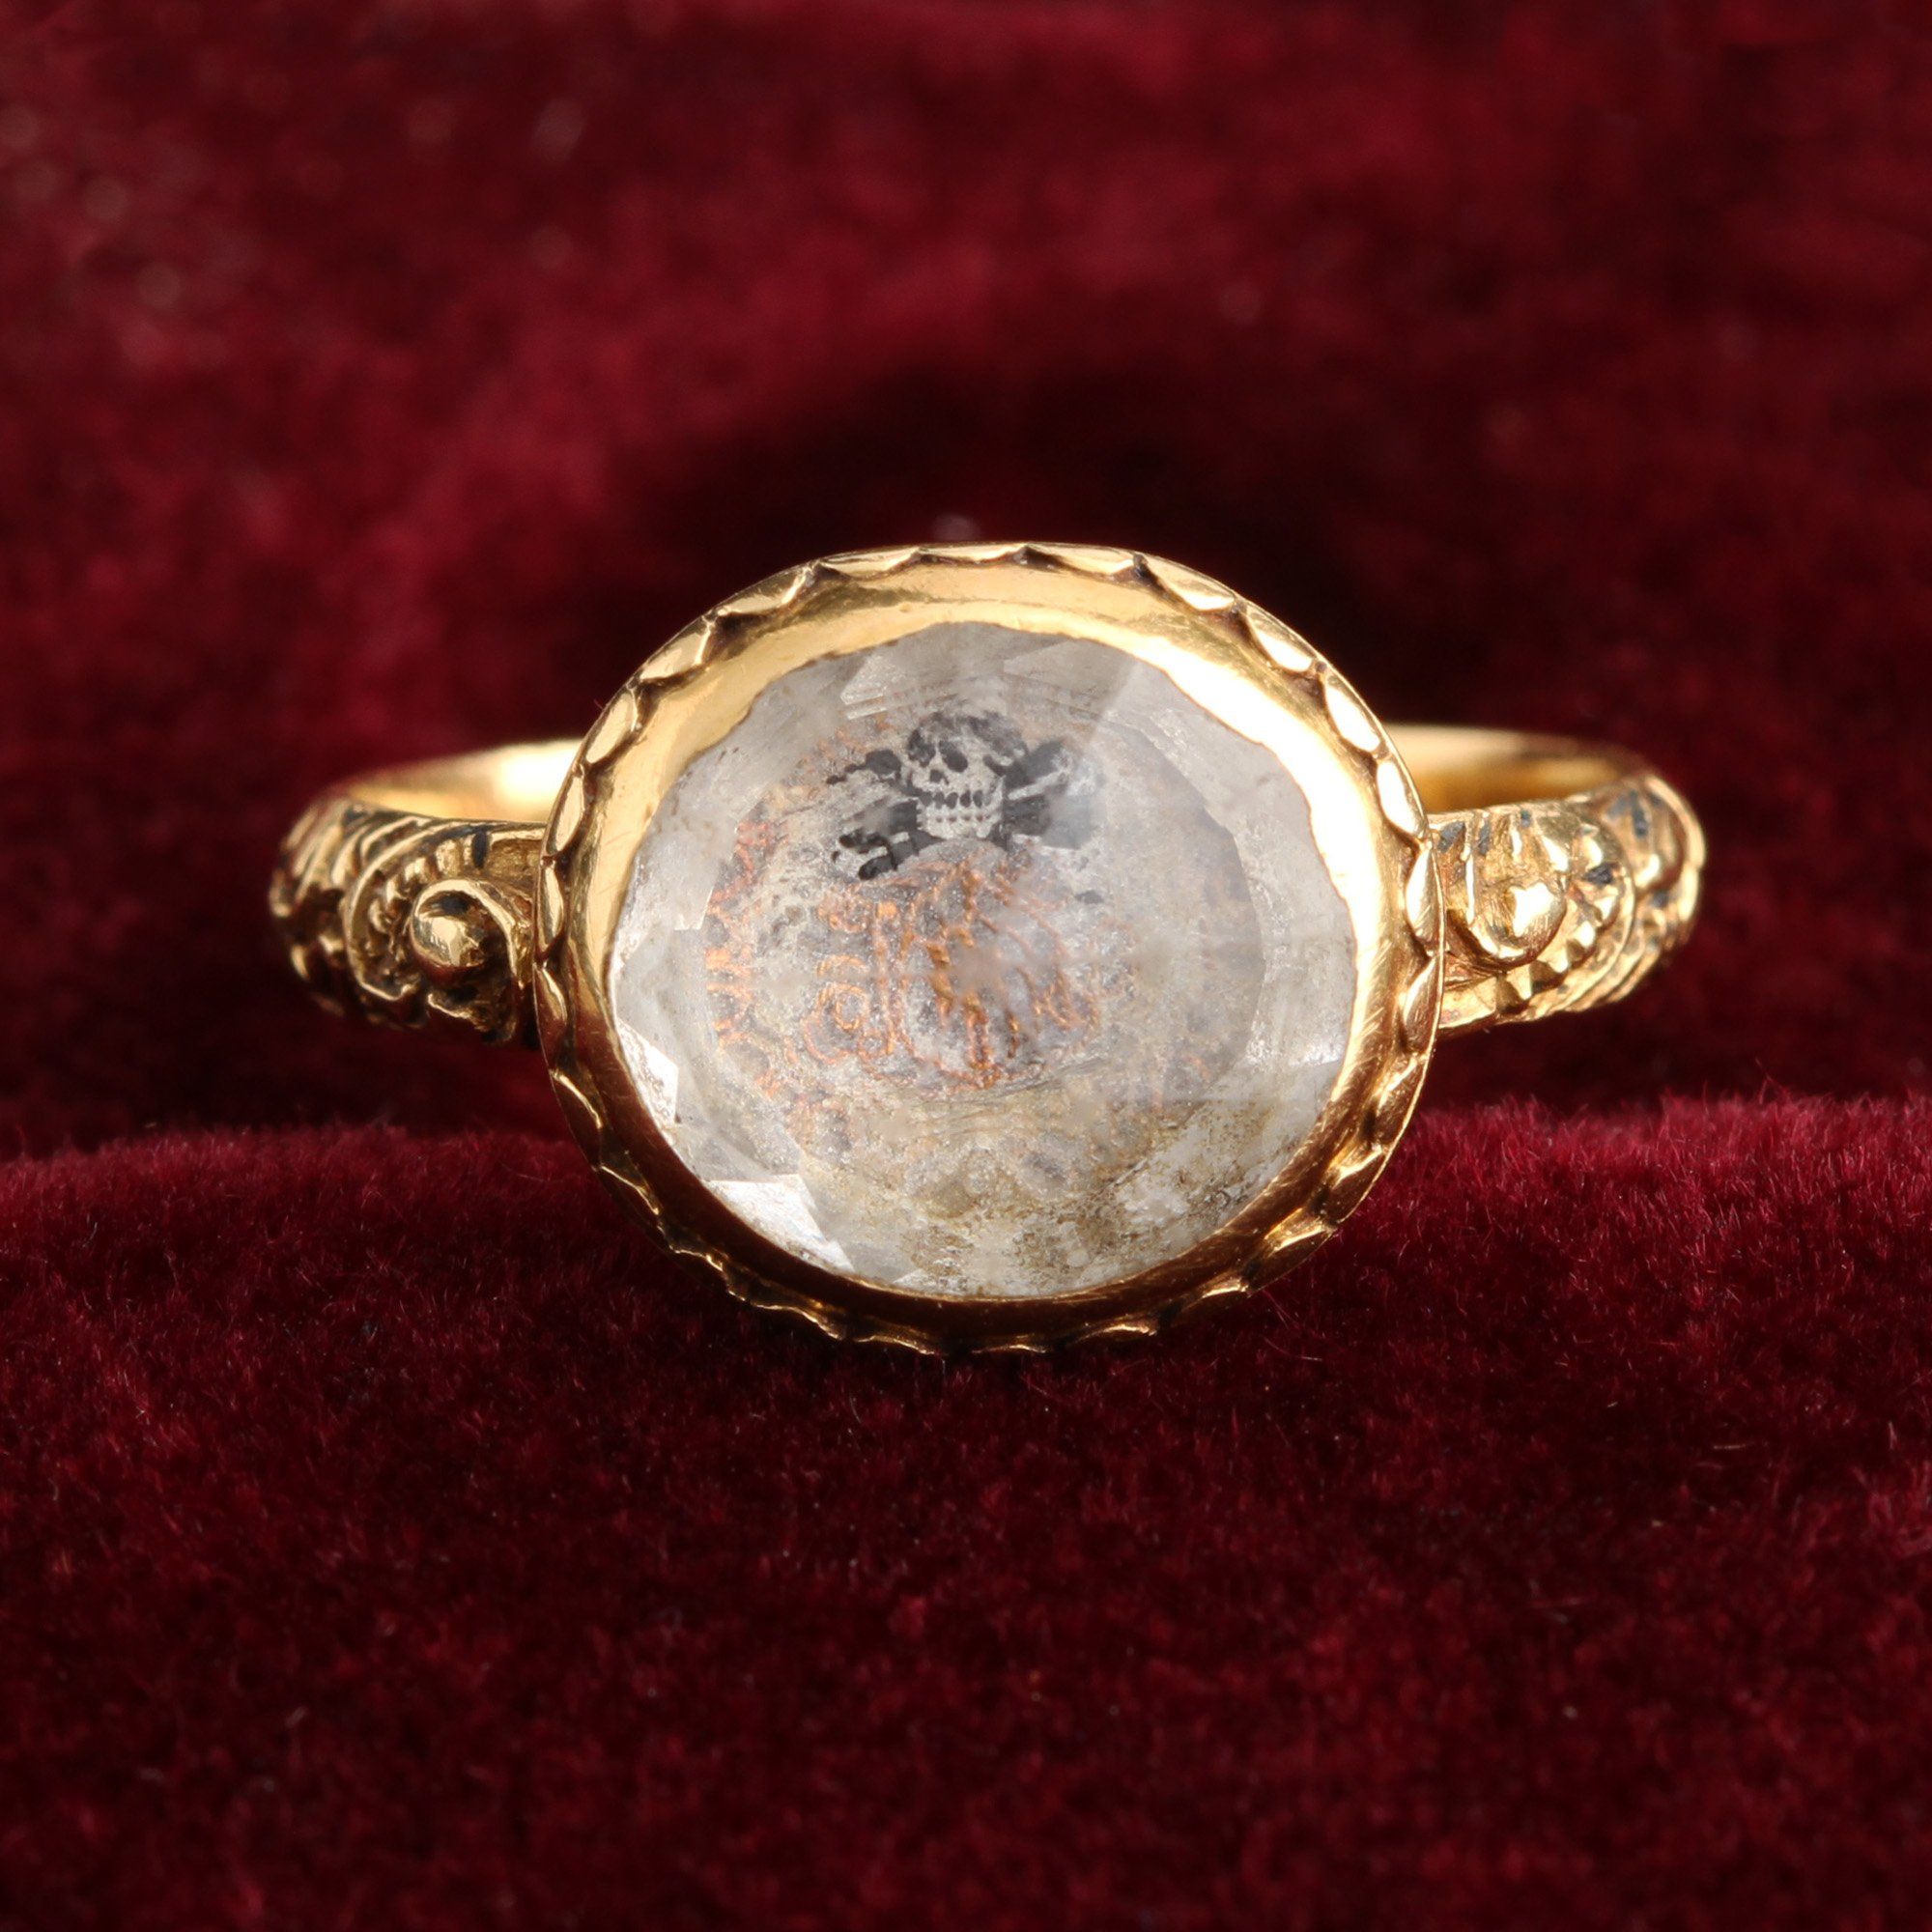 High carat gold stuart crystal mourning ring, c. 1680, from the EWJ archives.